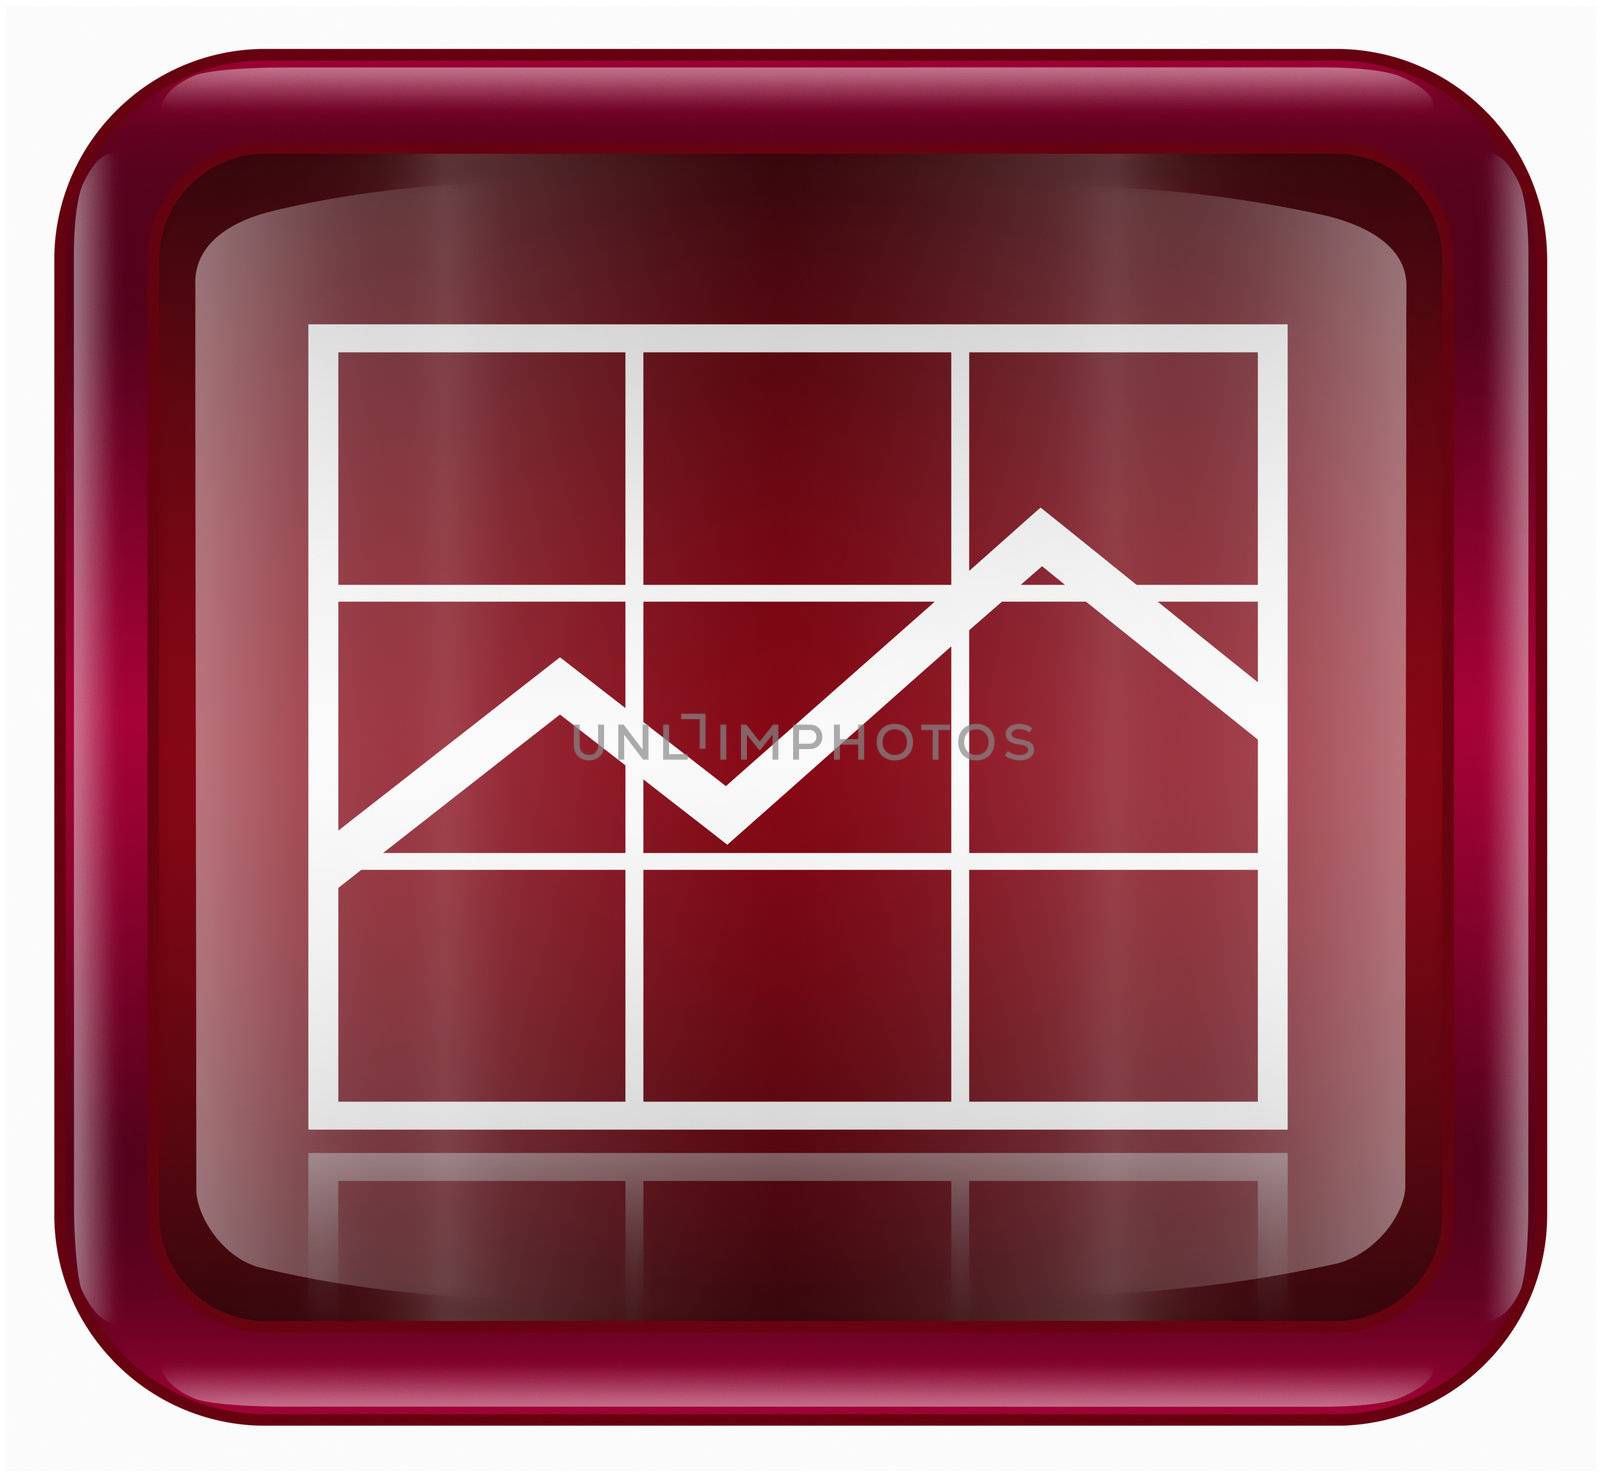 graph icon red, isolated on white background.